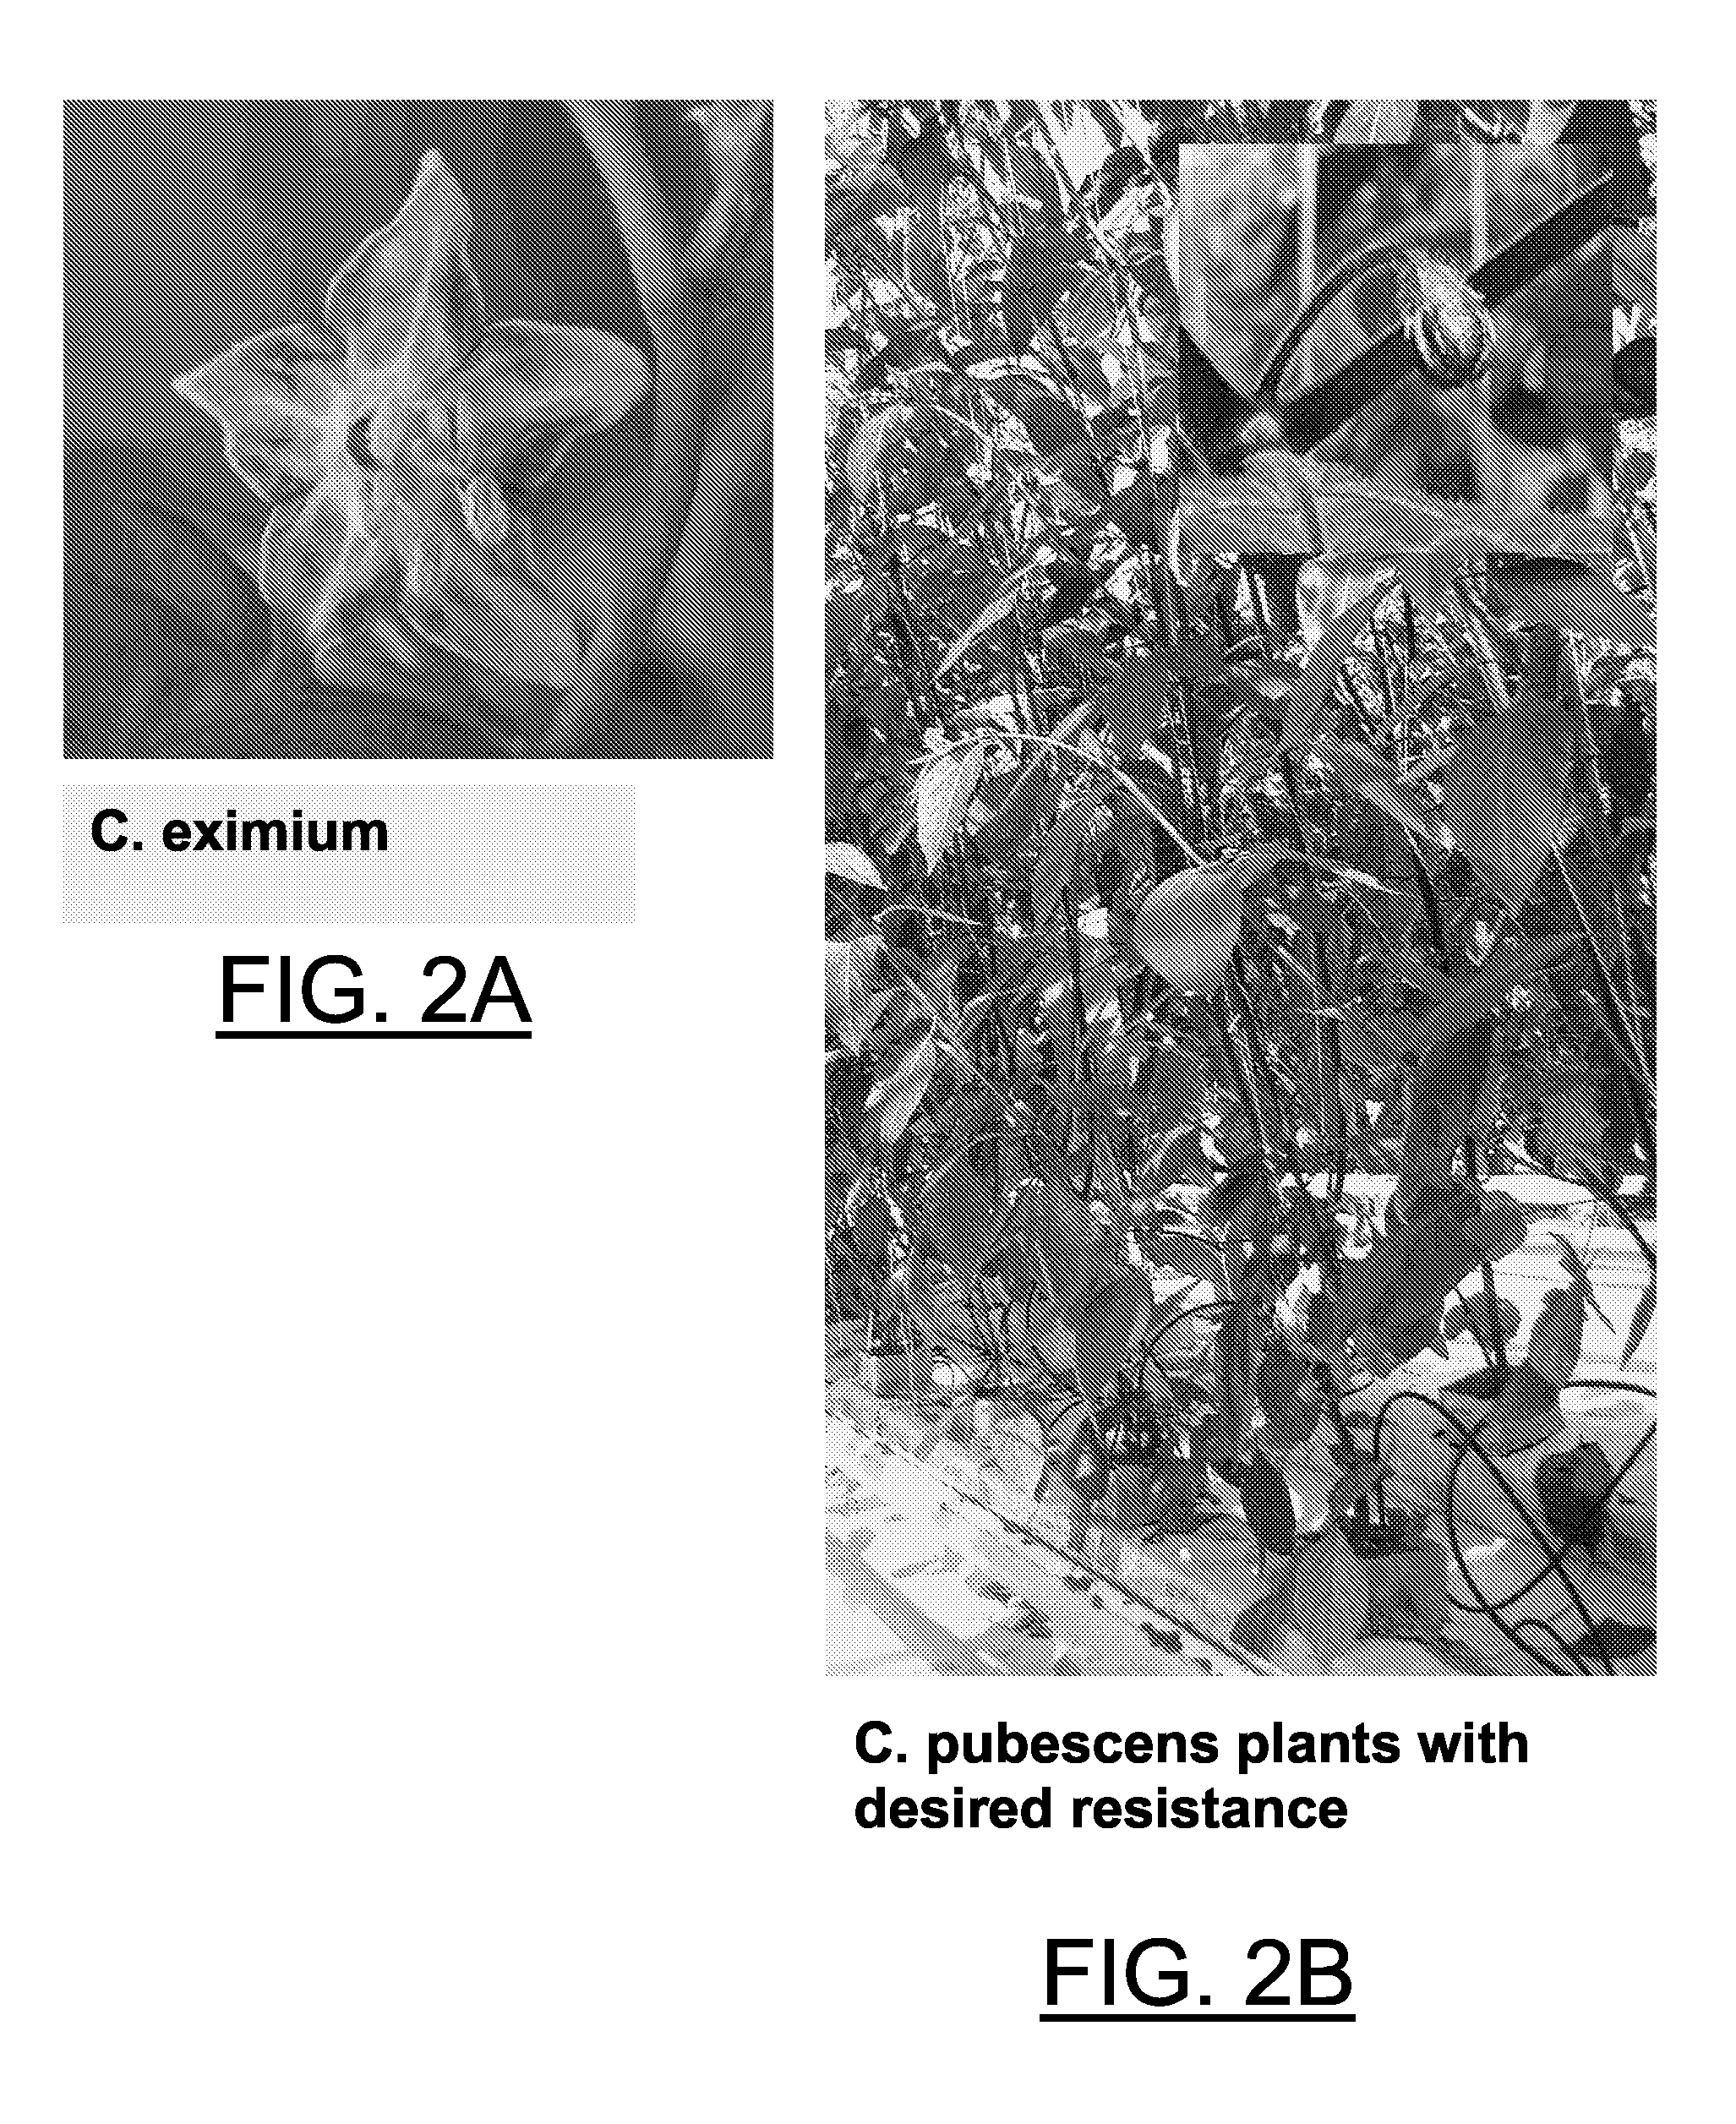 Method for transferring one or more genetic traits from a plant of the purple-flowered Capsicum species to a plant of the white flowered Capsicum species